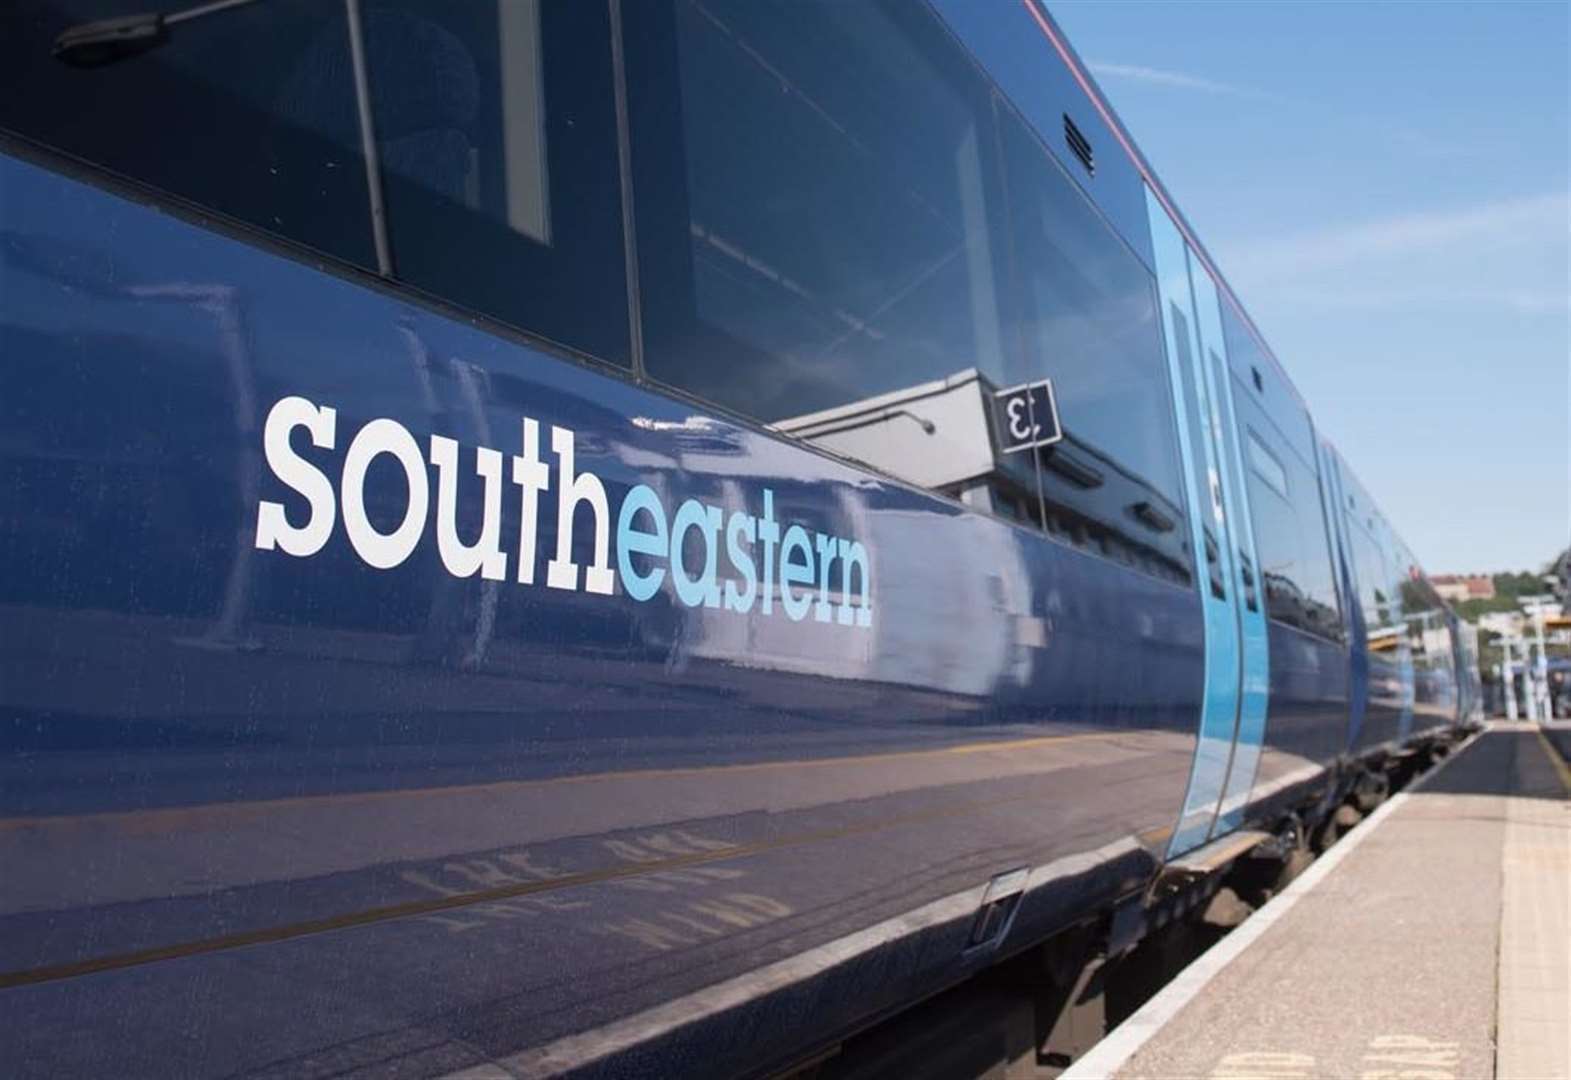 Hundreds of stations across the South East will benefit from the Tap and Go system by March 2025. Picture: Southeastern